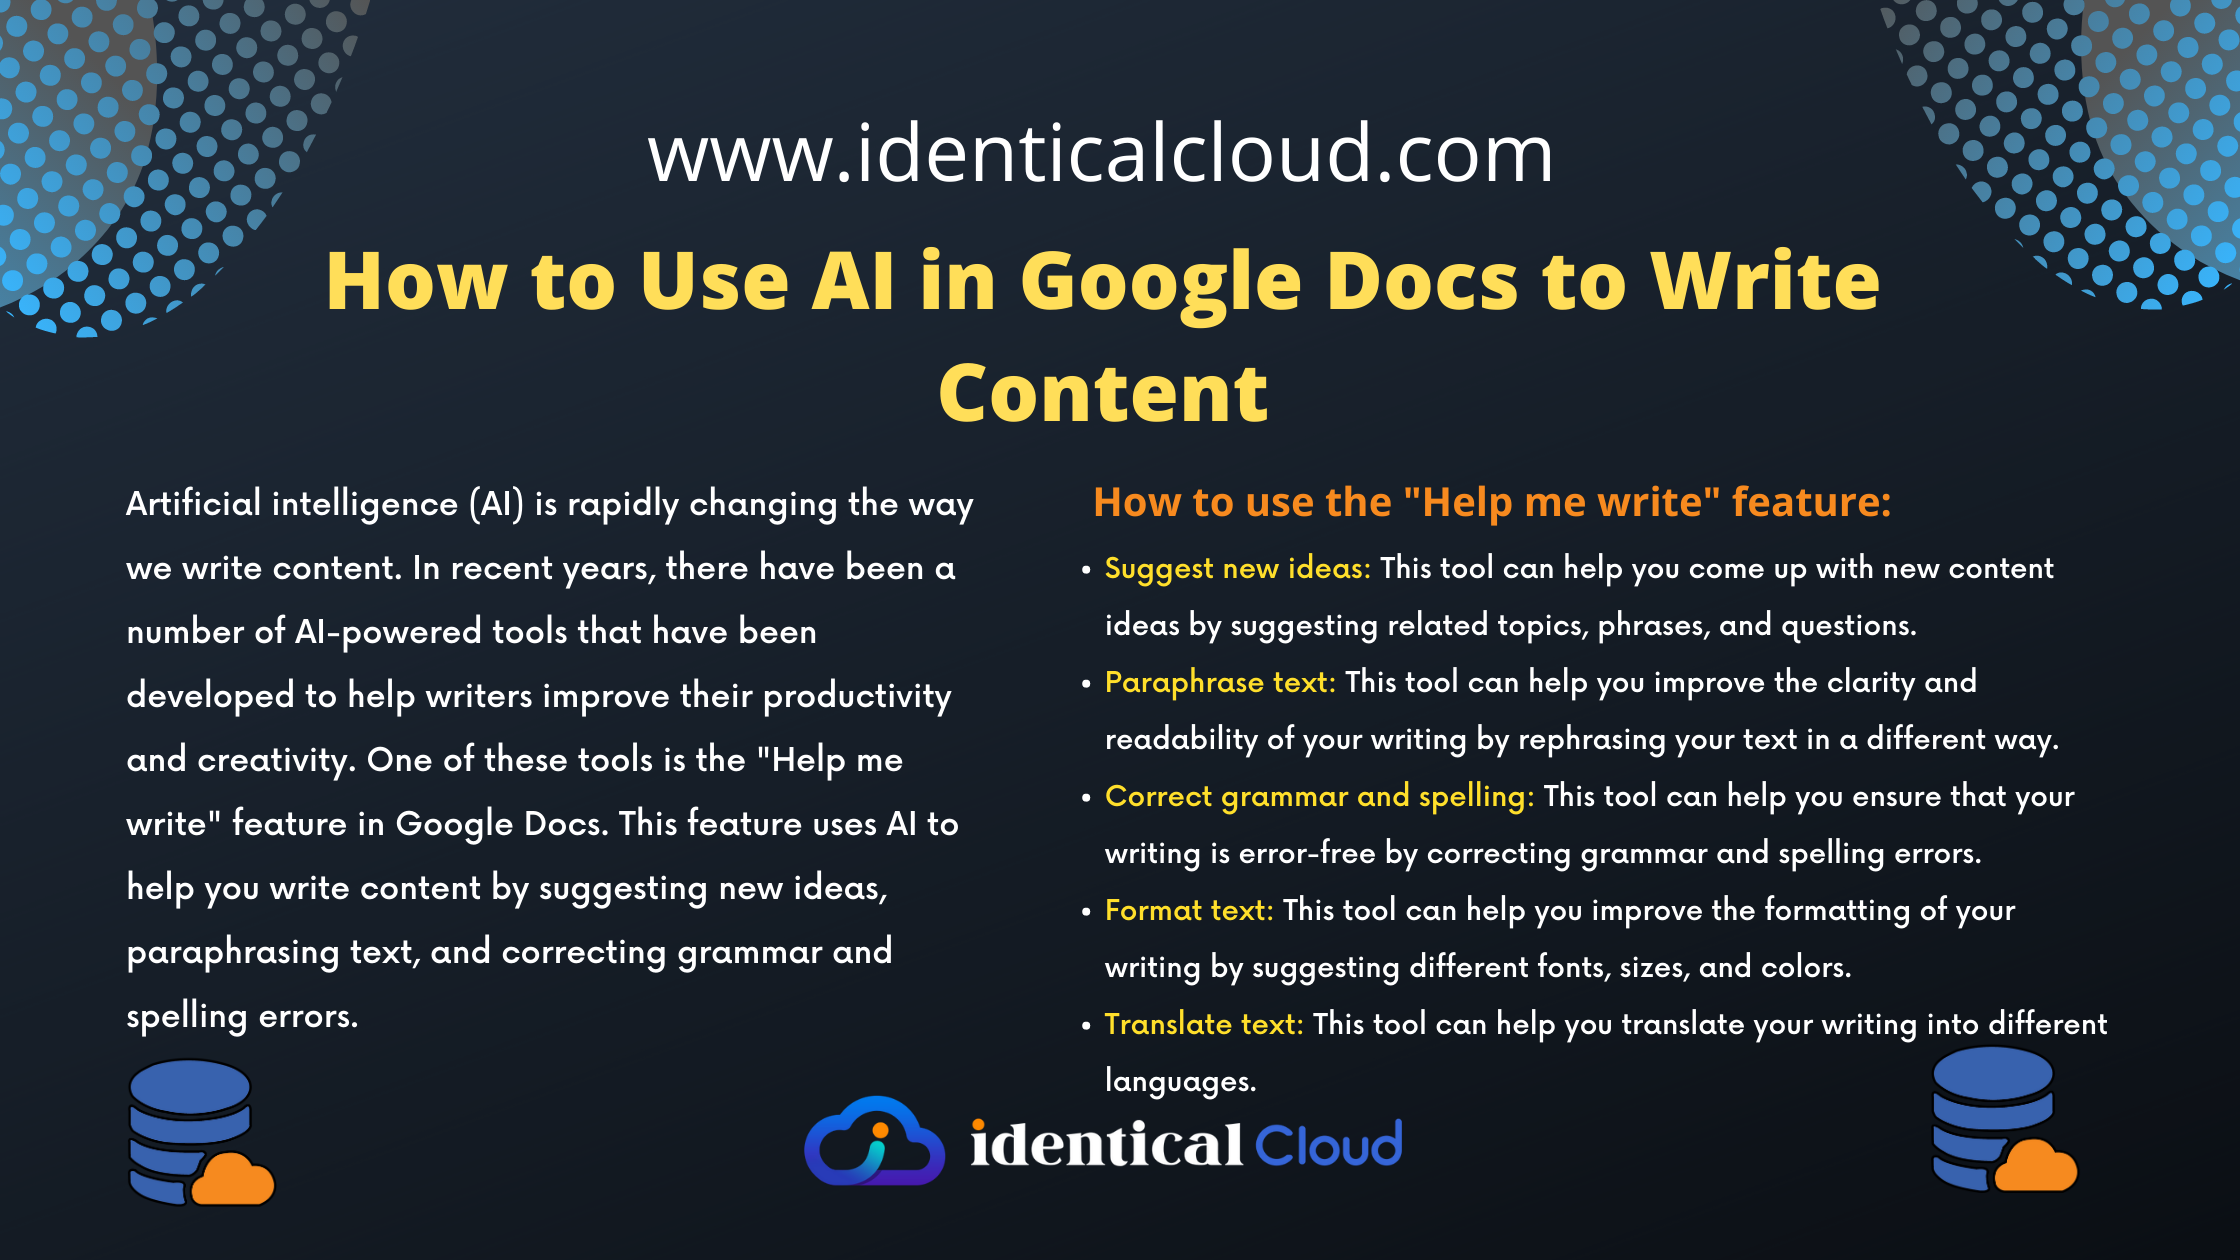 How to Use AI in Google Docs to Write Content - identicalcloud.com